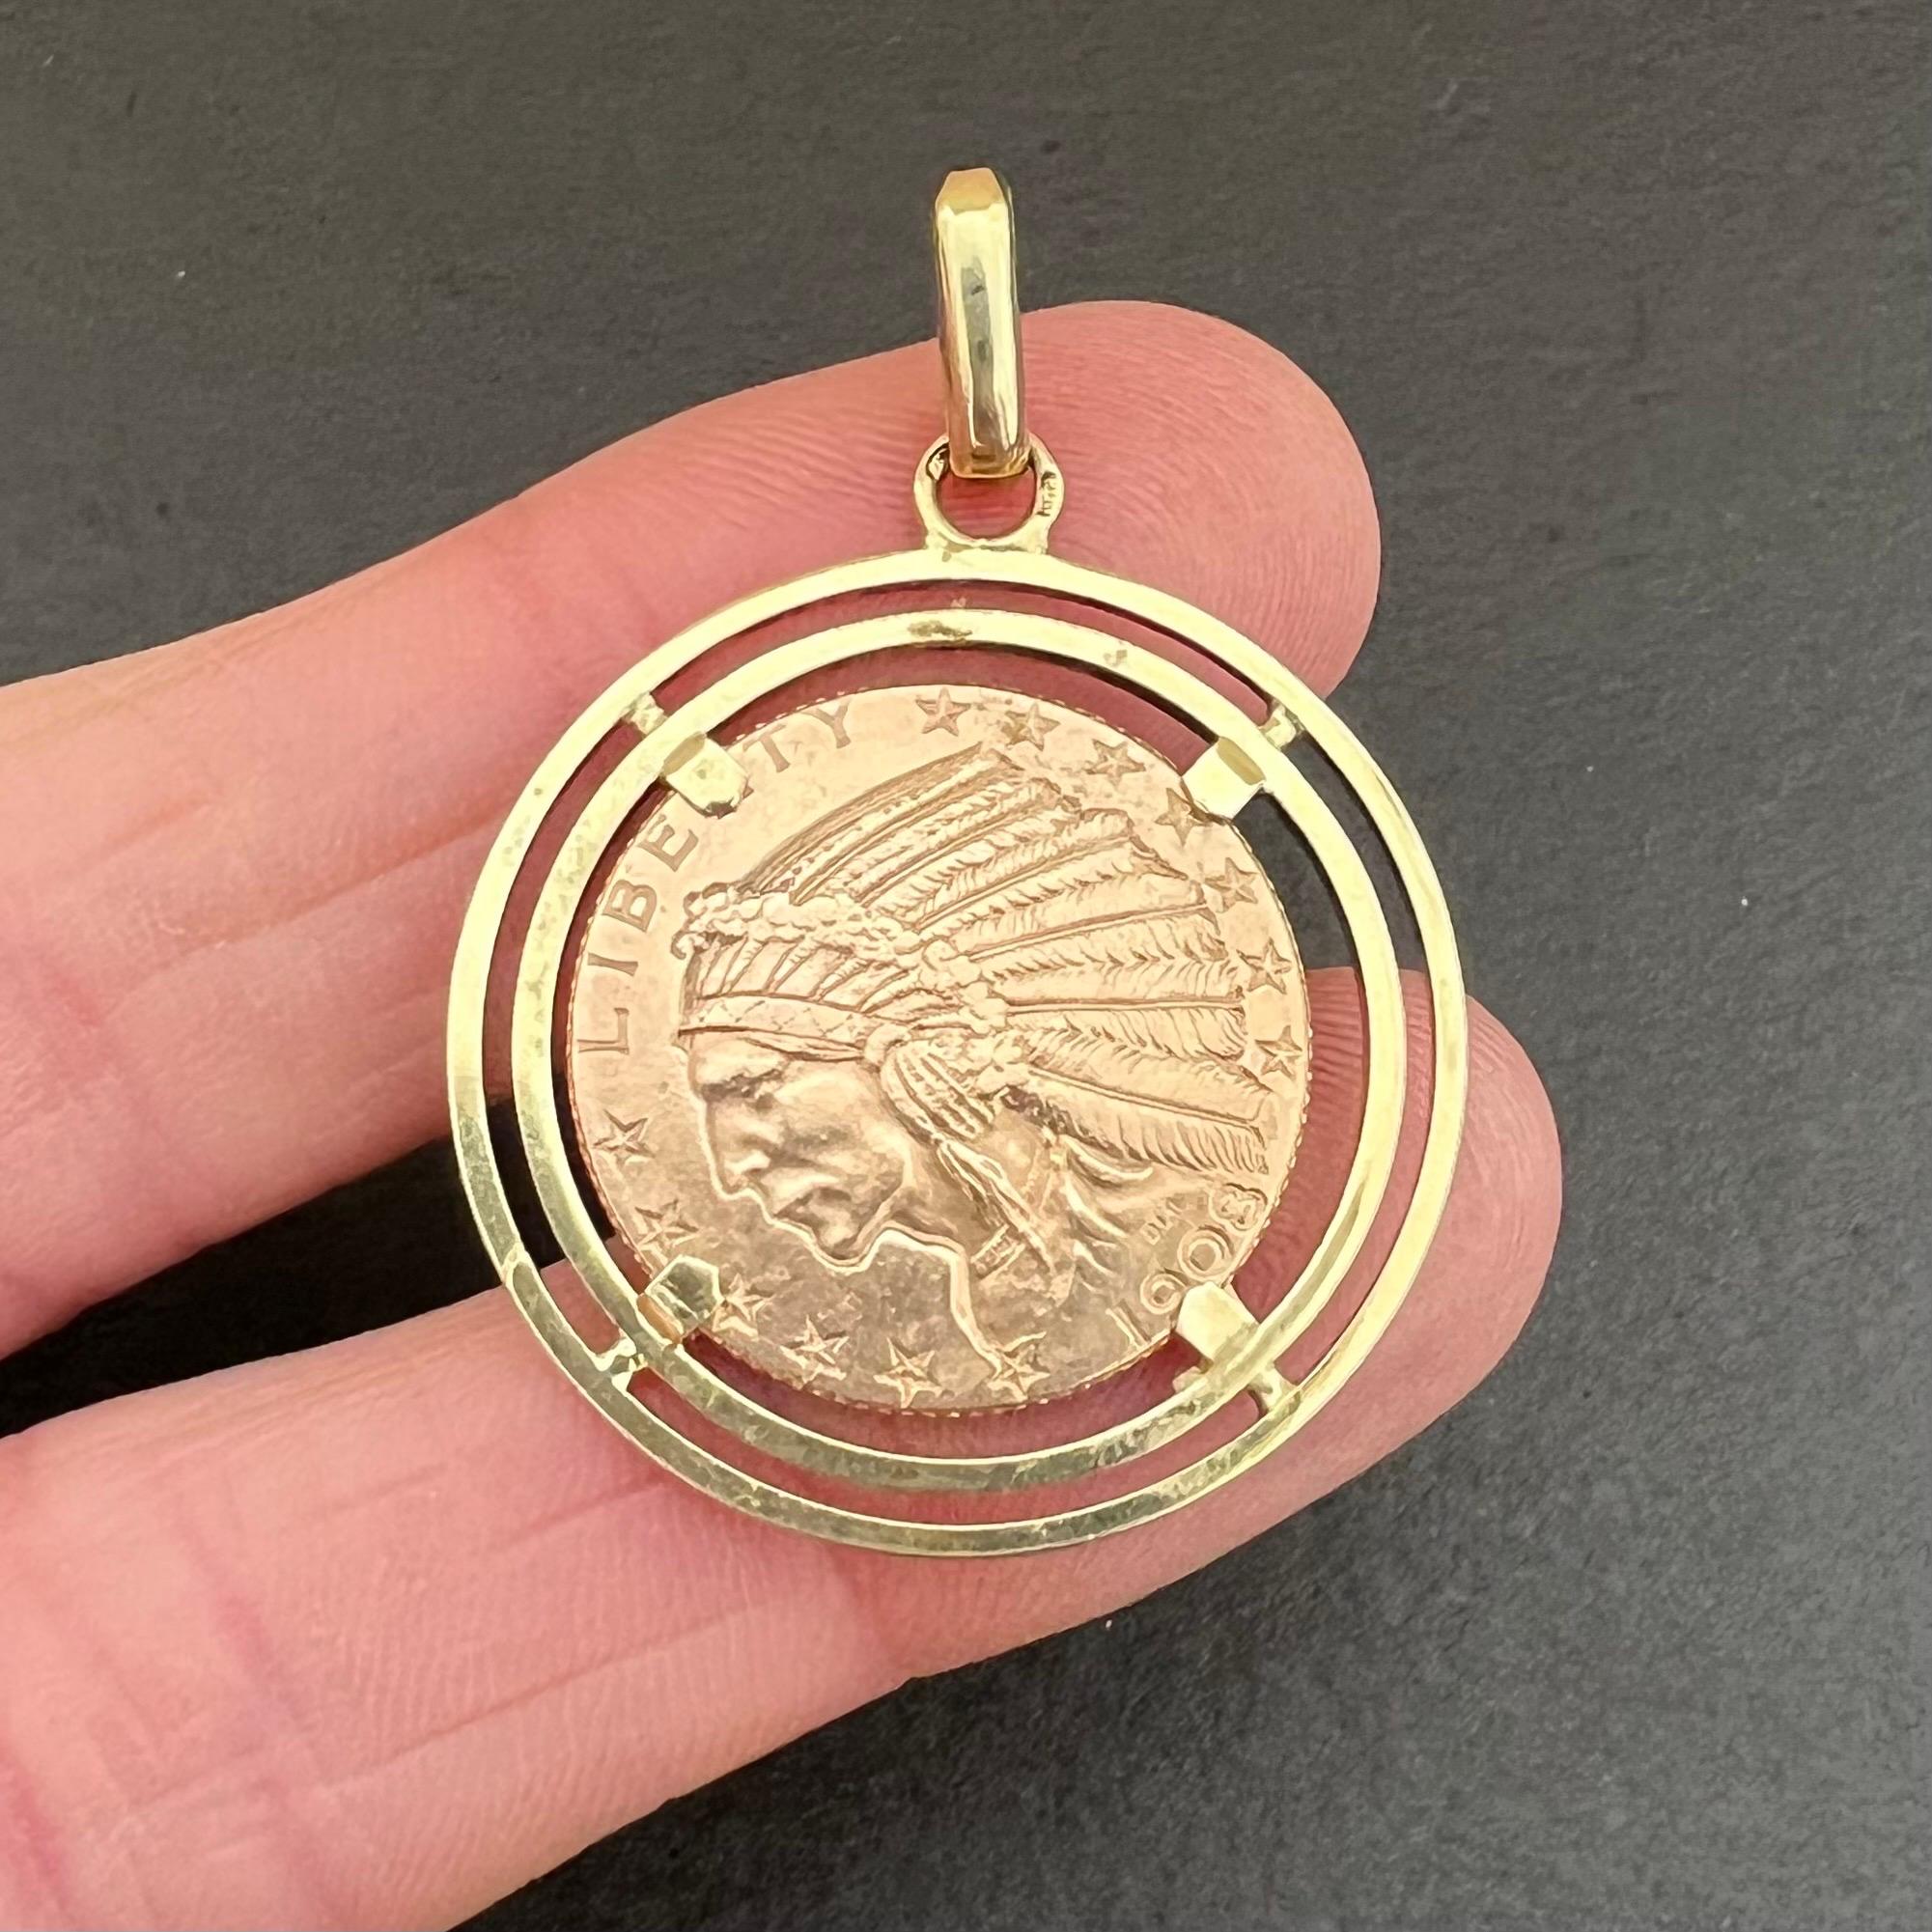 A 1908 five dollar coin charm pendant. The coin consists of 21.6 karat gold and the pendant is made of 14 karat gold. On the reverse the obverse bears the portrait of an Indian chief with formal headdress, with the words LIBERTY at the top and the